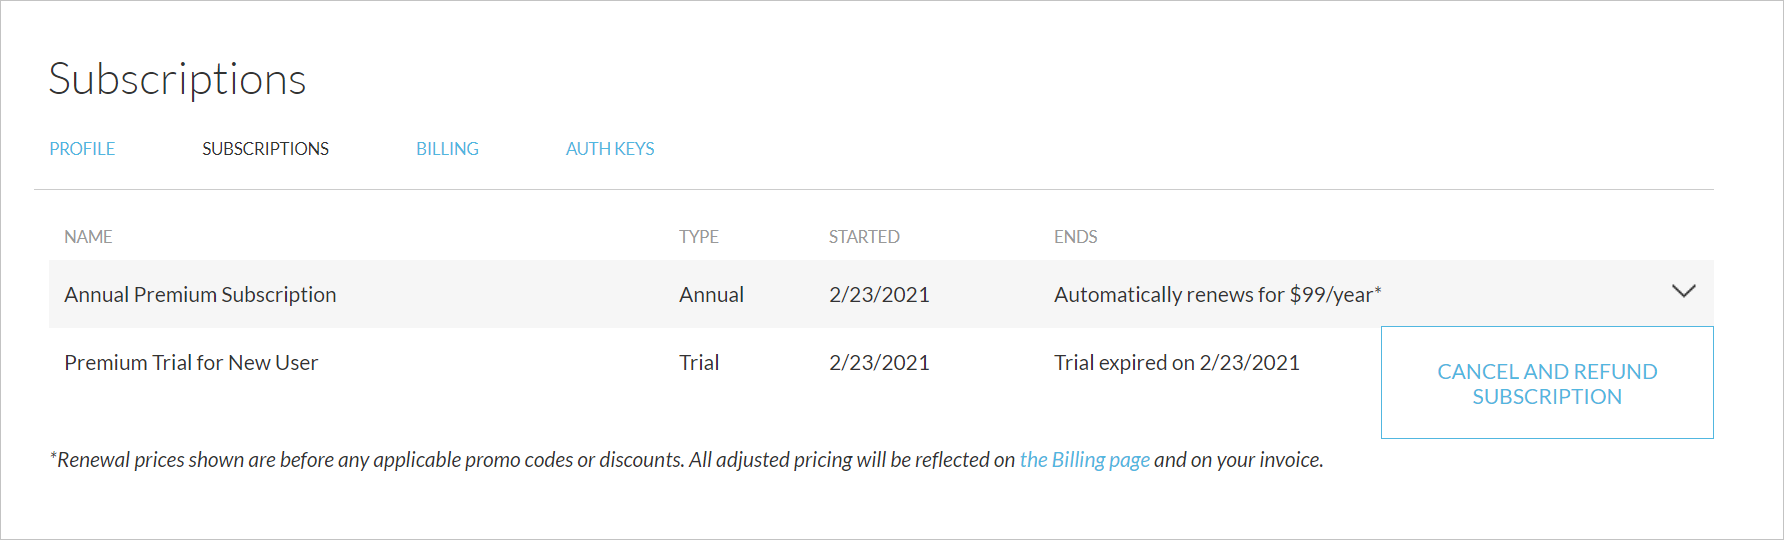 Example: Subscriptions view with full refund cancellation option shown